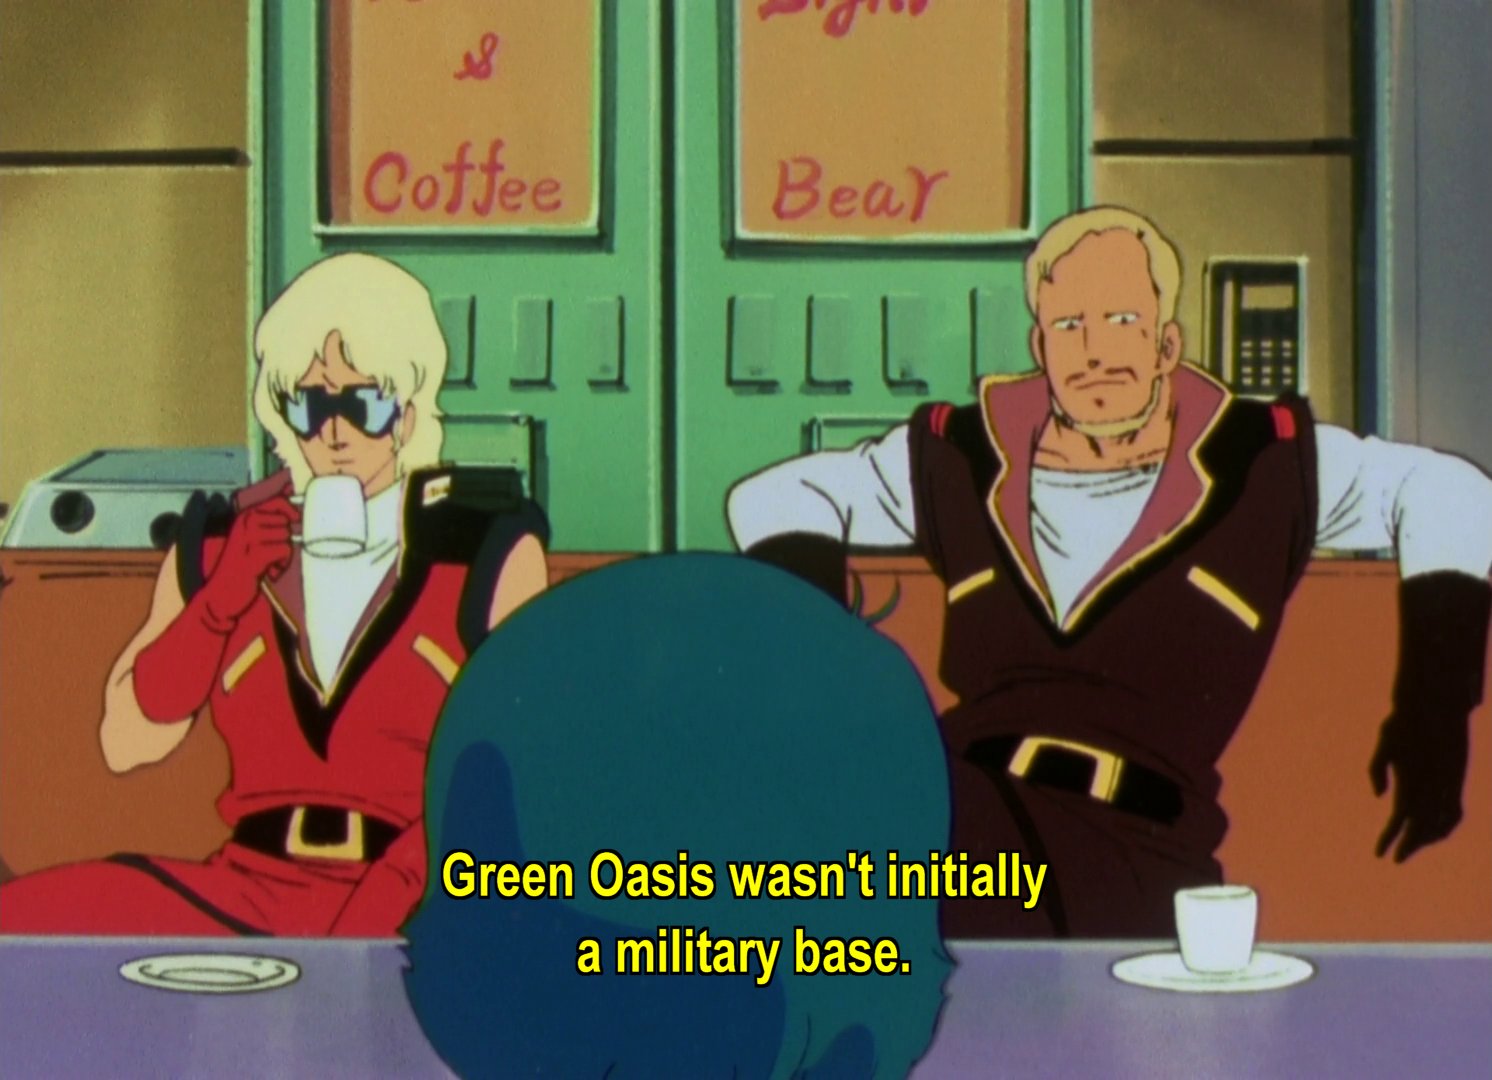 Lt Quattro Bajeena, a man who looks suspiciously like Char Aznable, and Henken, a blond man with a small beard and moustache, sitting on a couch in front of two drinks machines. The machines are labelled Coffee and Bear.